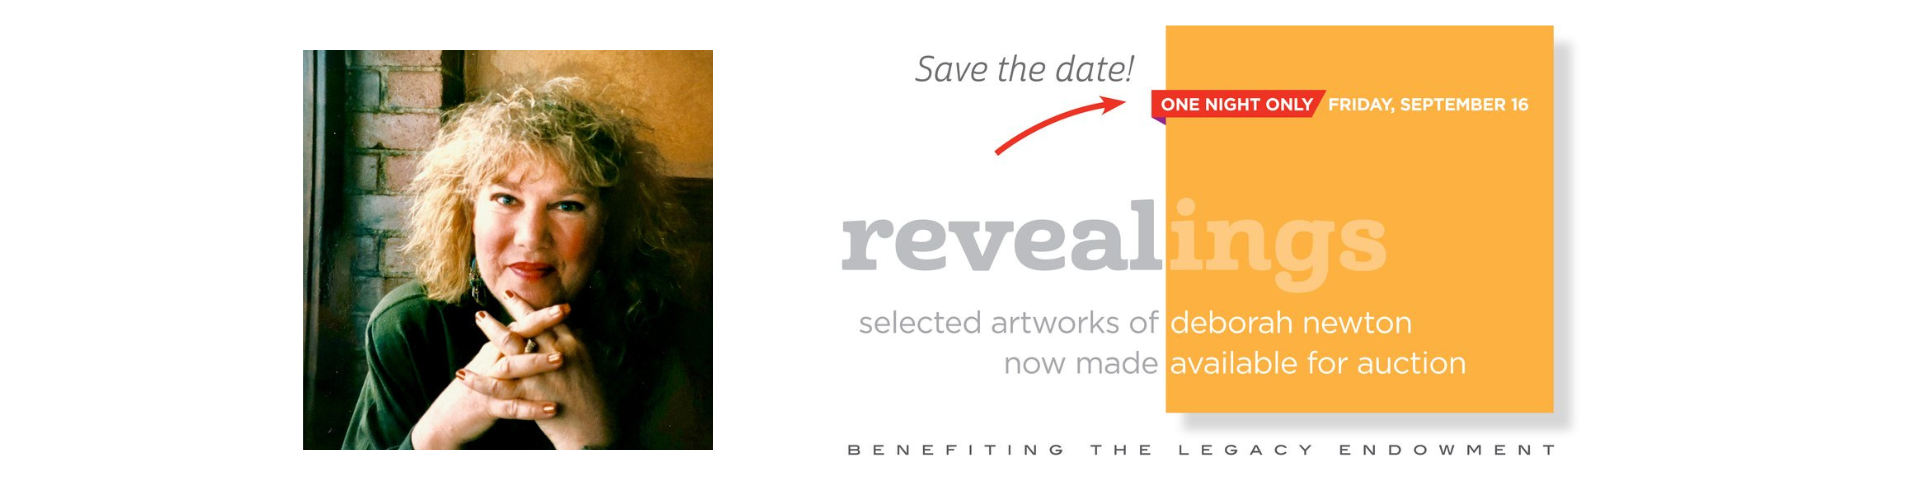 Picture at left of a smiling woman wearing a green blouse. Text overlay reads: Save the Date! One night only, Friday, September 16. revealings - selected artworks of deborah newton now made available for auction. Benefiting the legacy endowment. 